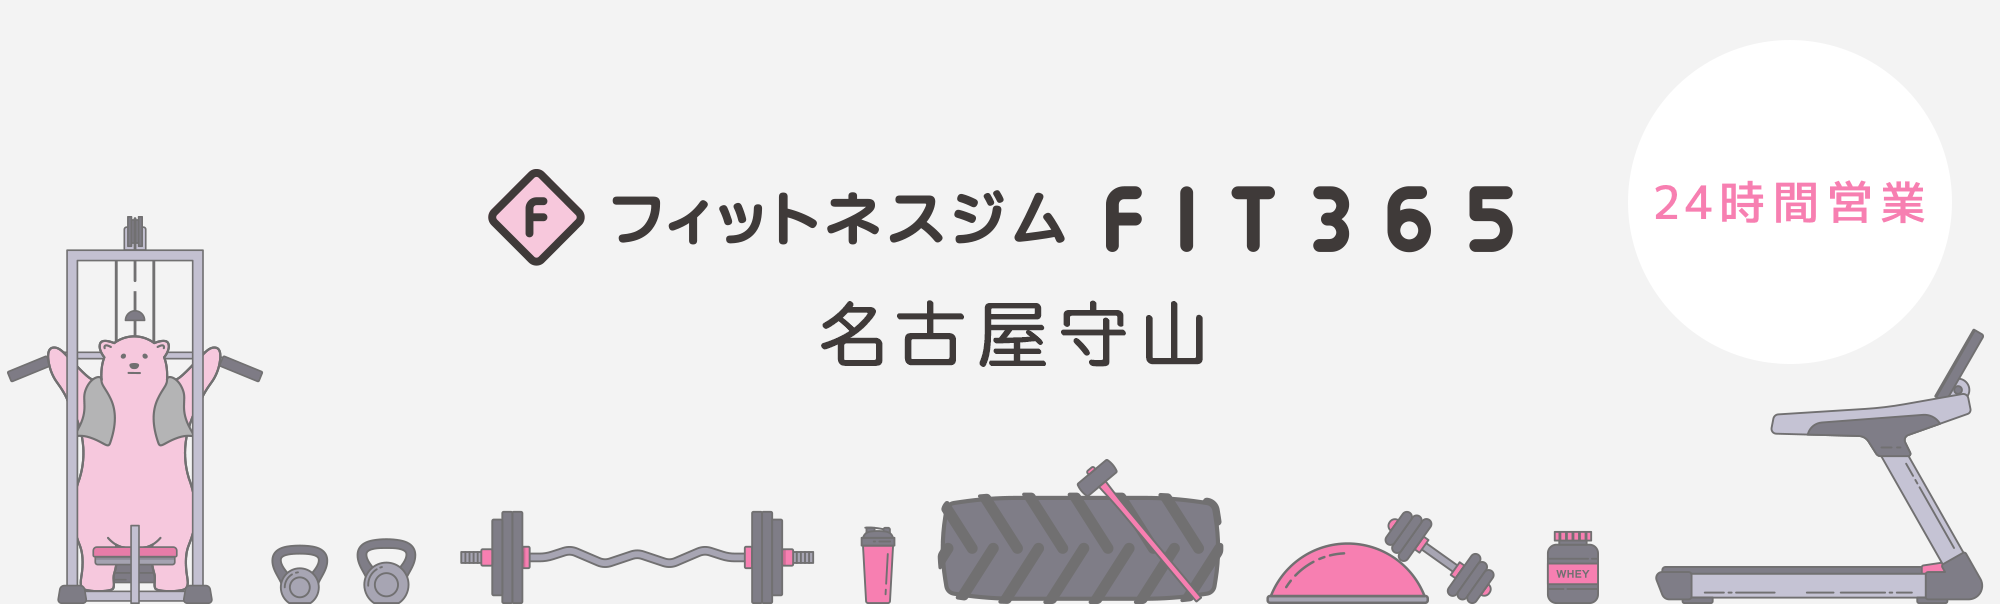 FIT365 名古屋守山